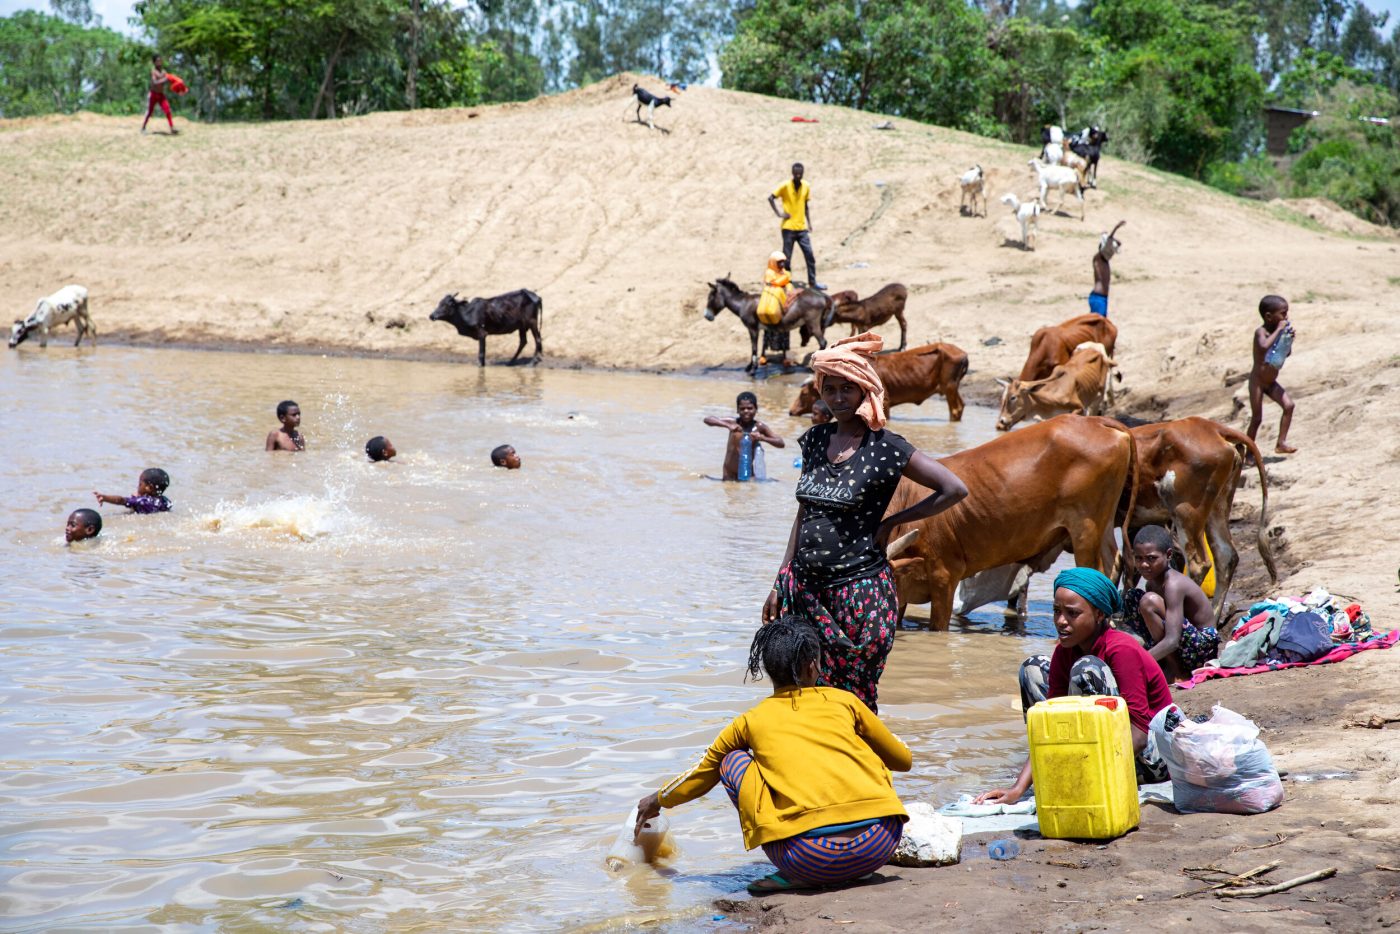 The manmade dam in Keranso, Shone Woreda, traps water from the previous rainy season which the local community uses for washing clothes, bathing, swimming, taking home for household chores, and providing water for their cattle. Credit SCI Foundation/I.Getachew